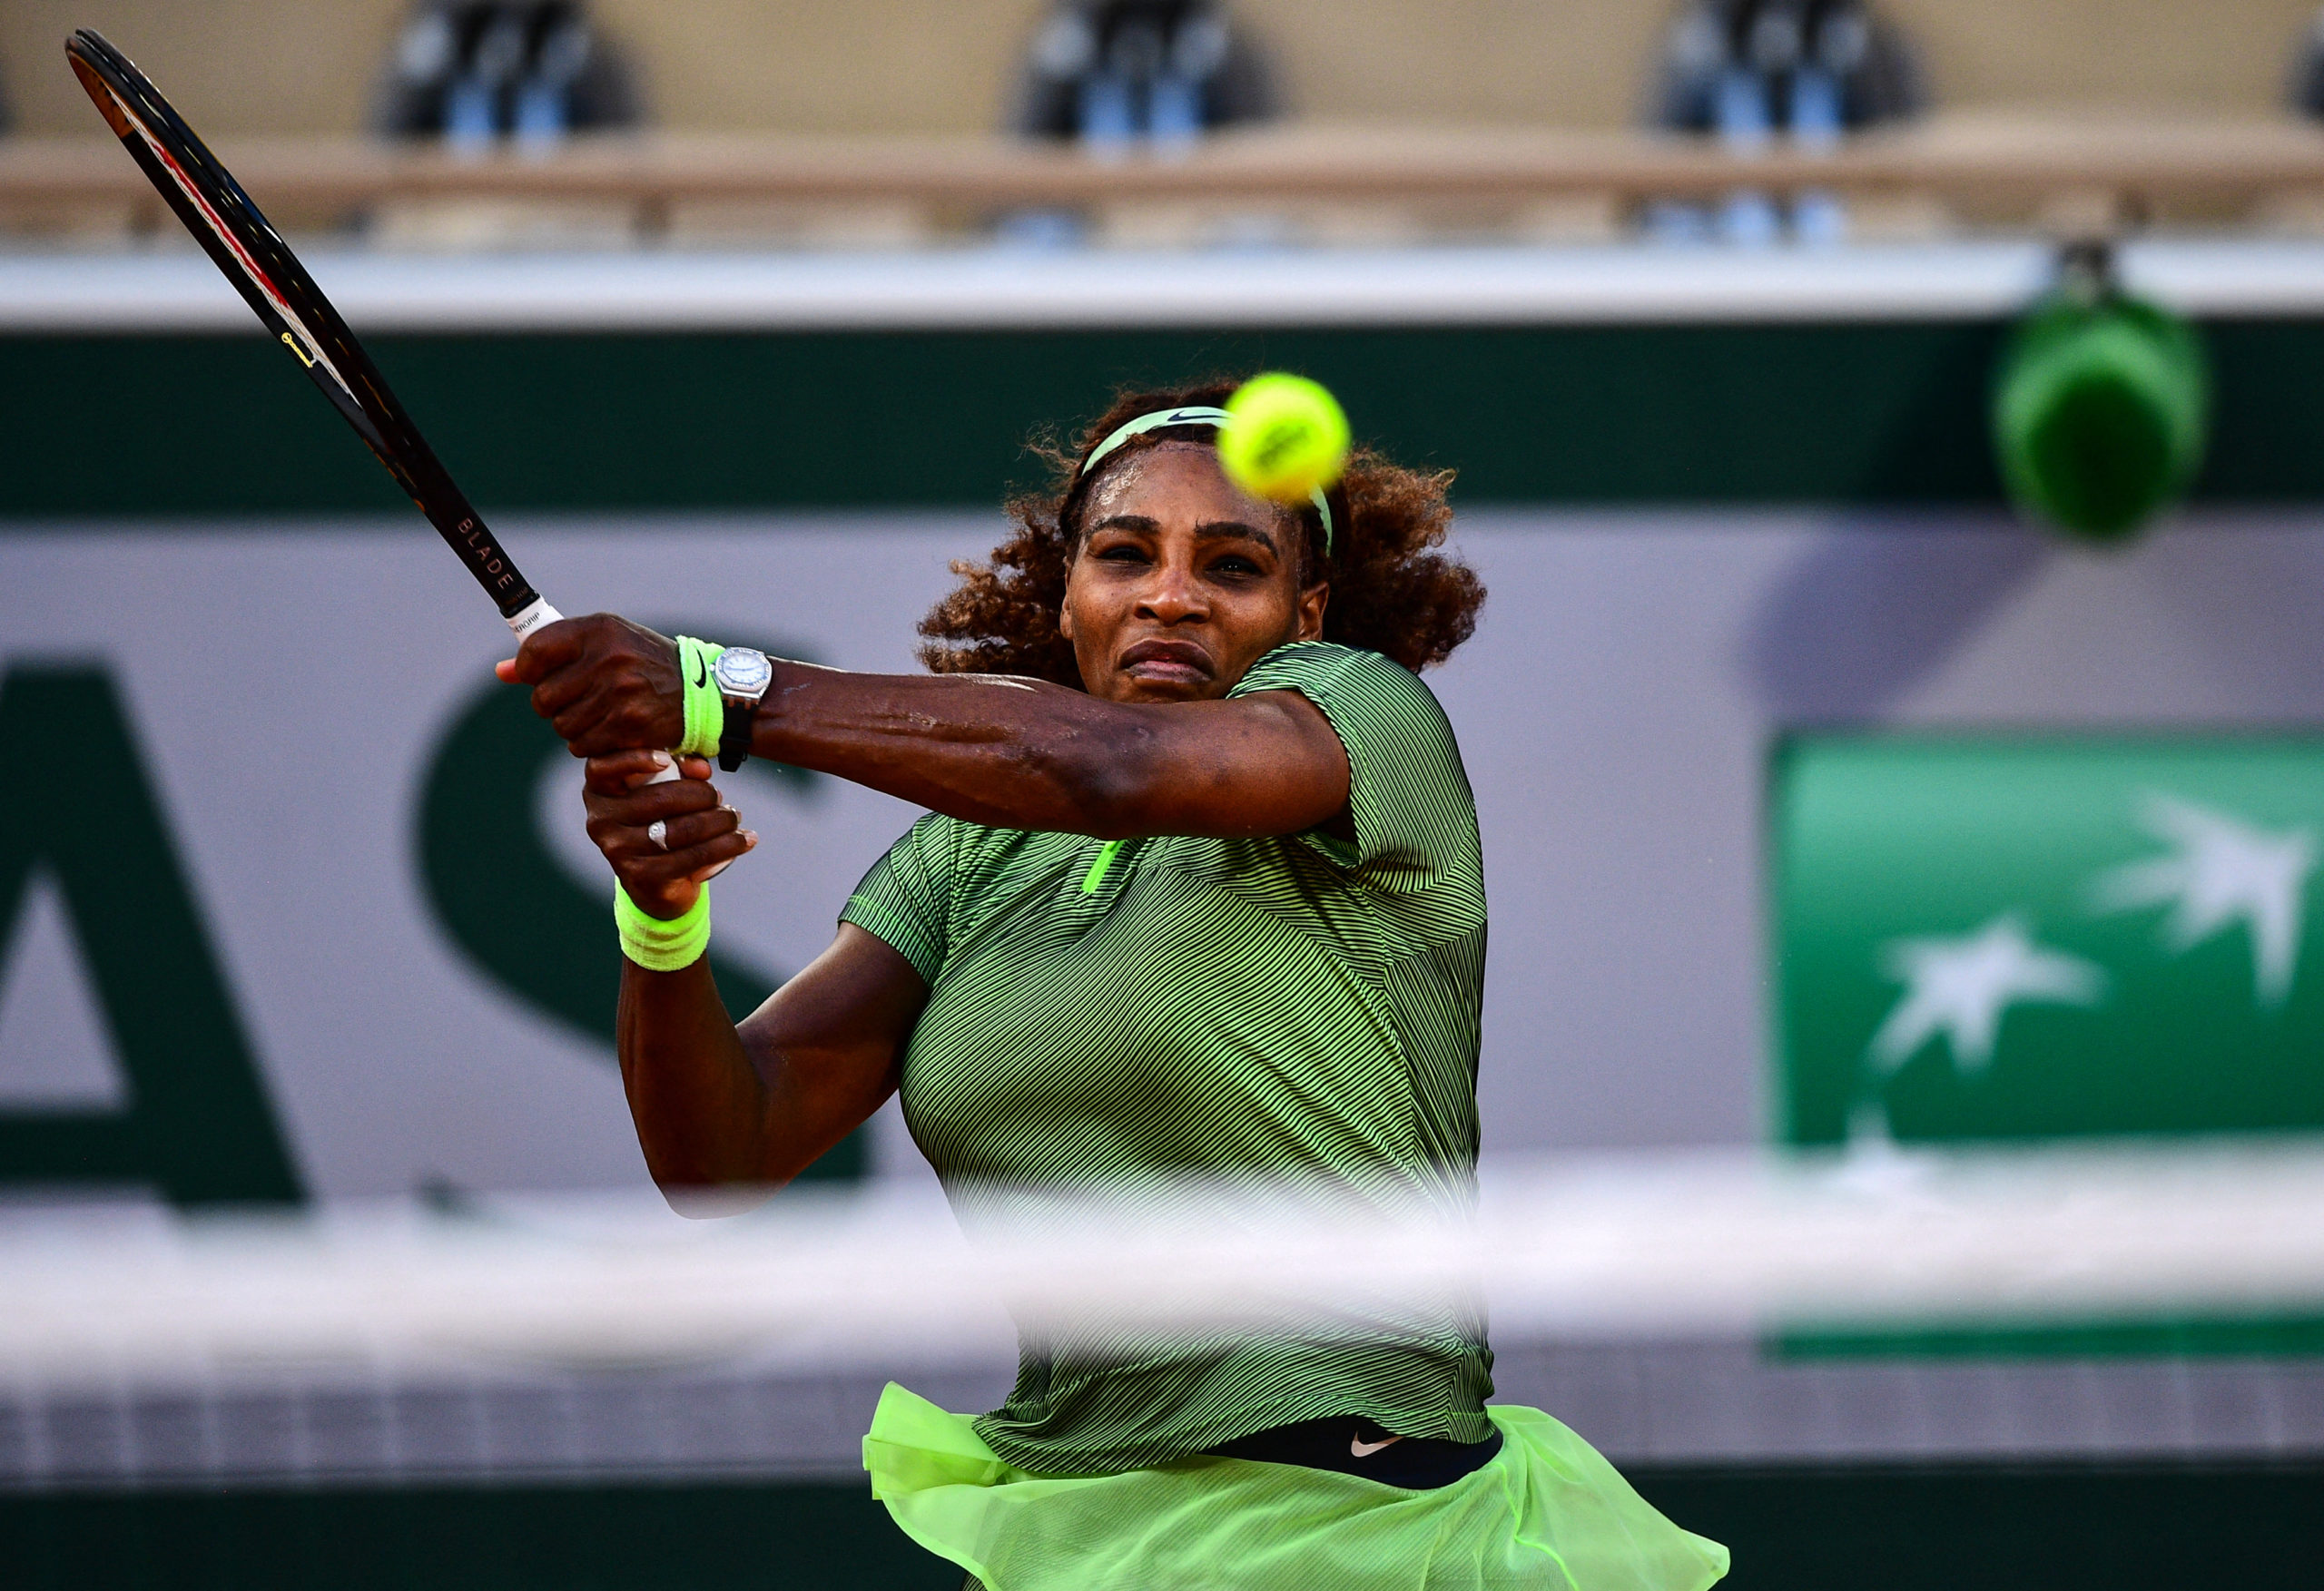 Serena drops out of WTA top | Inquirer Sports